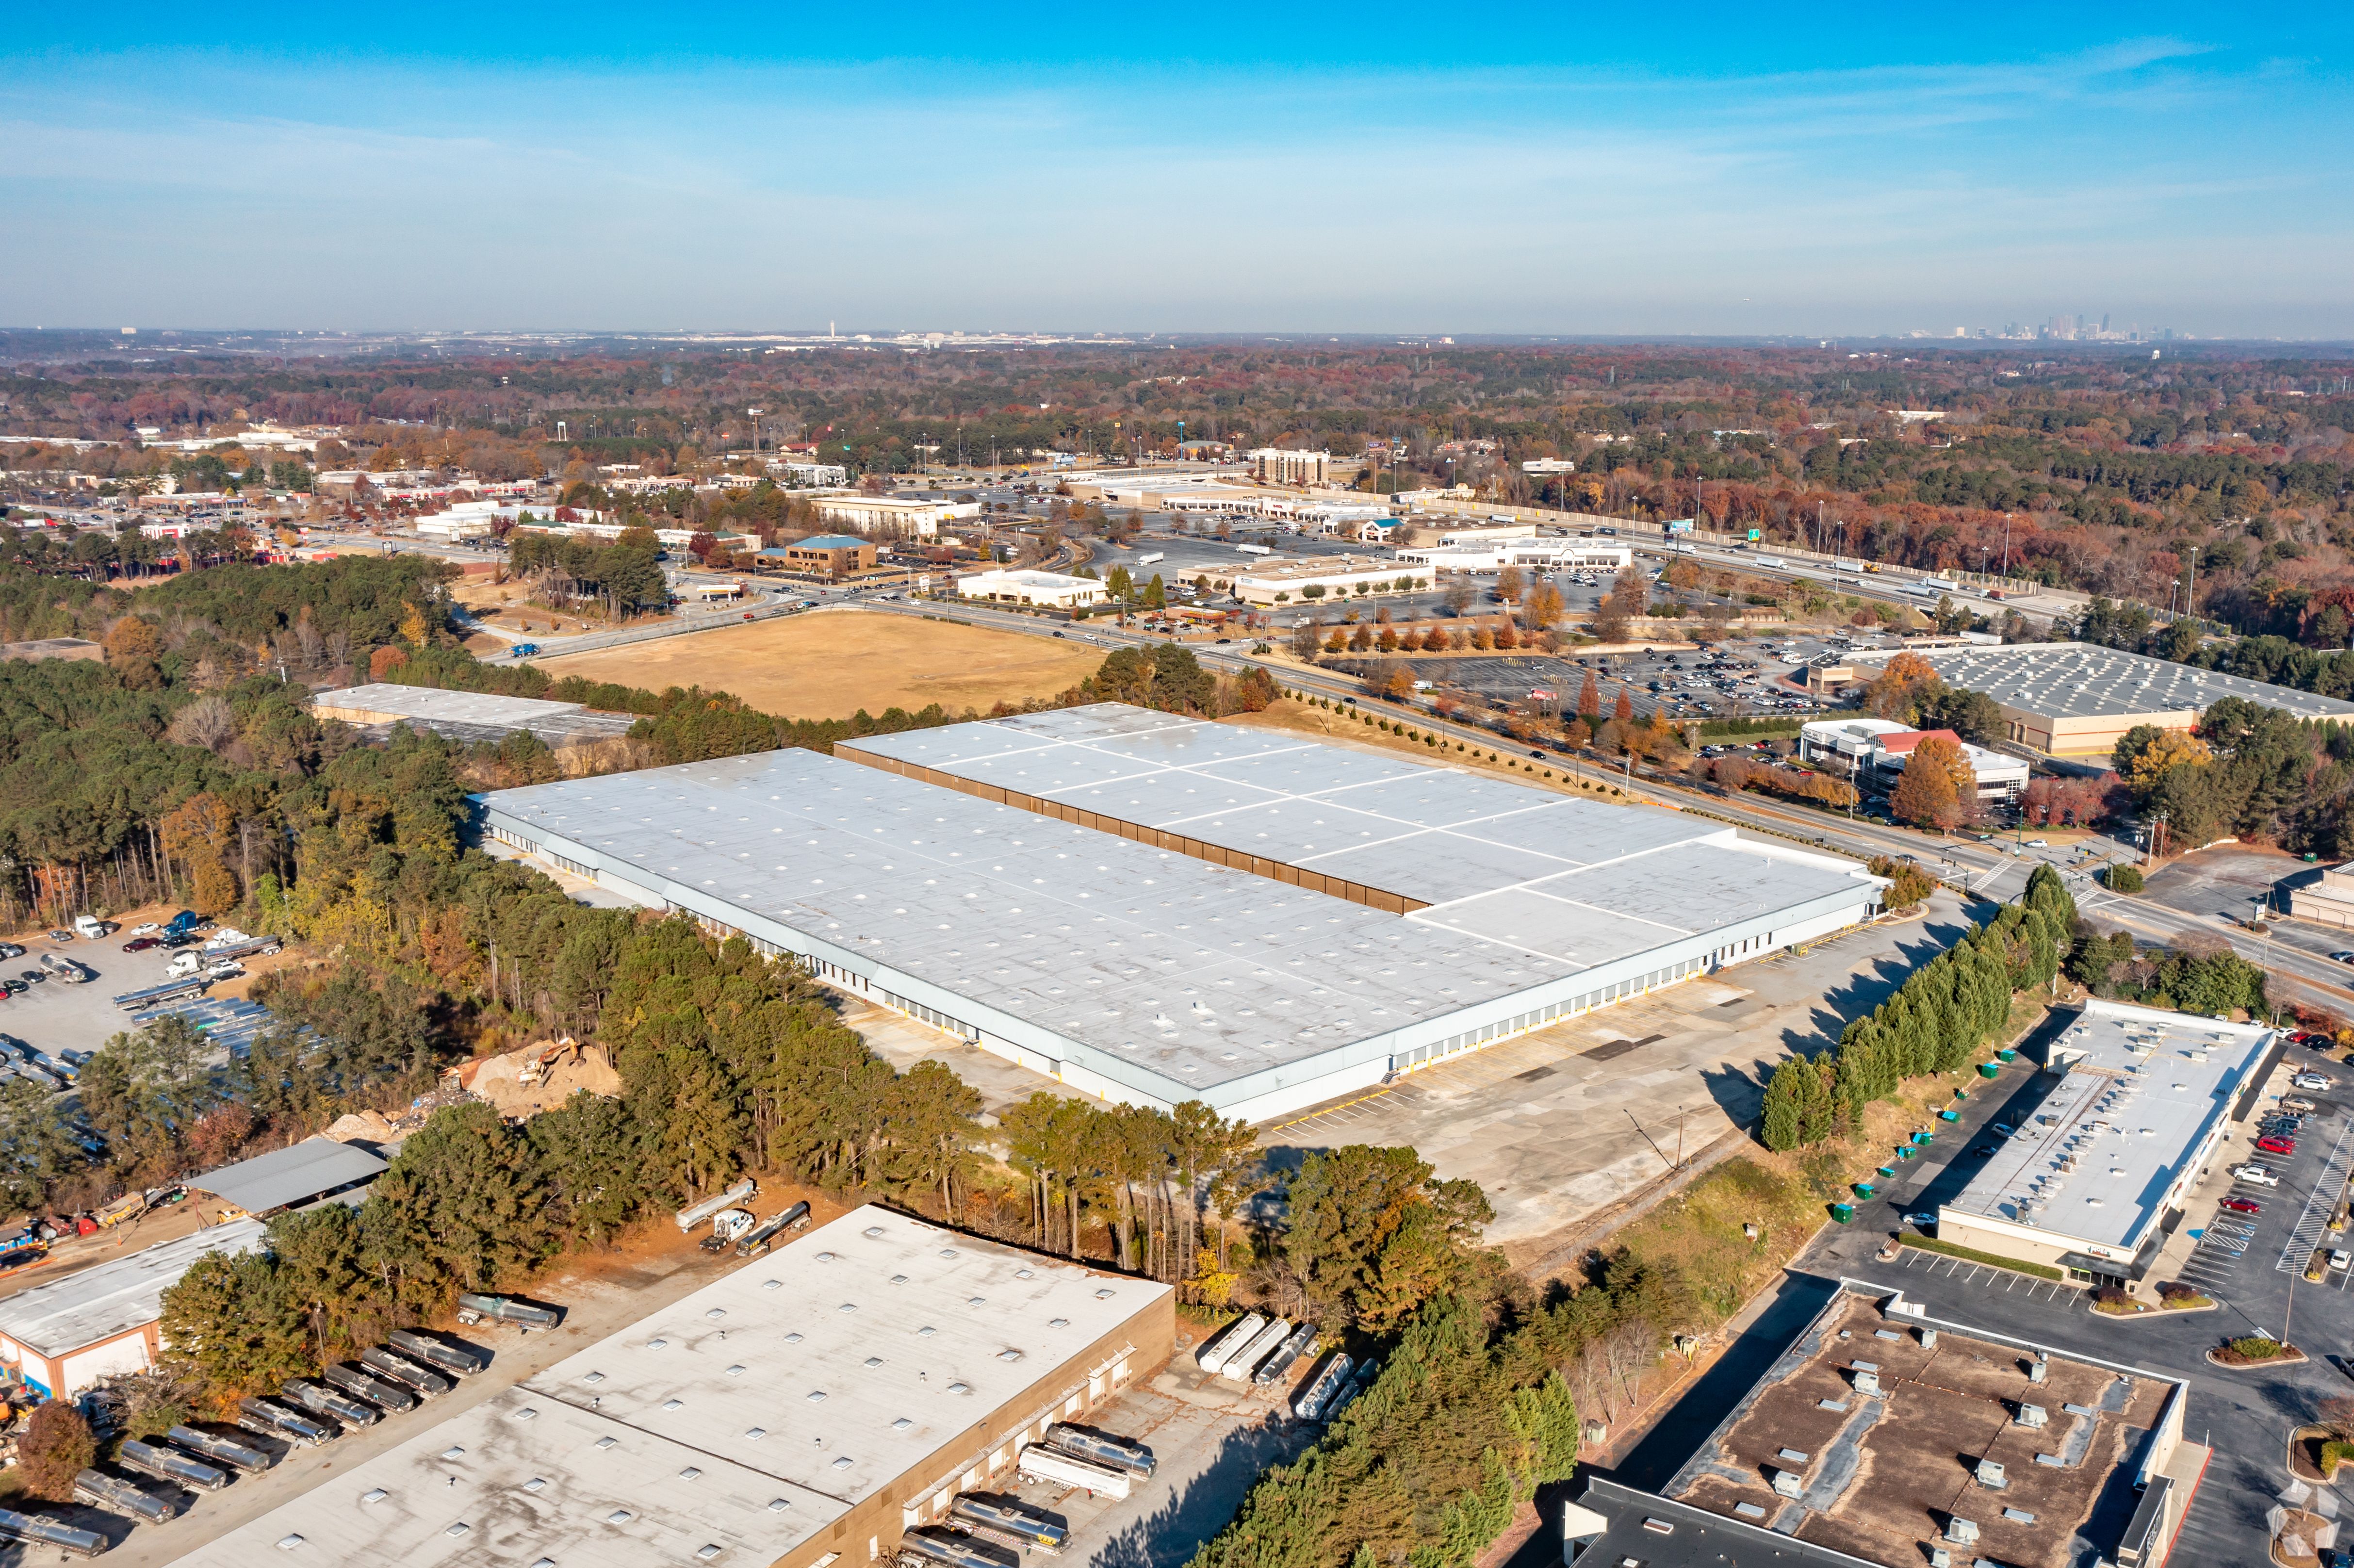 An aerial view of the Mt Zion Road property shows a large, flat grey building with trees and other industrial parks surrounding it